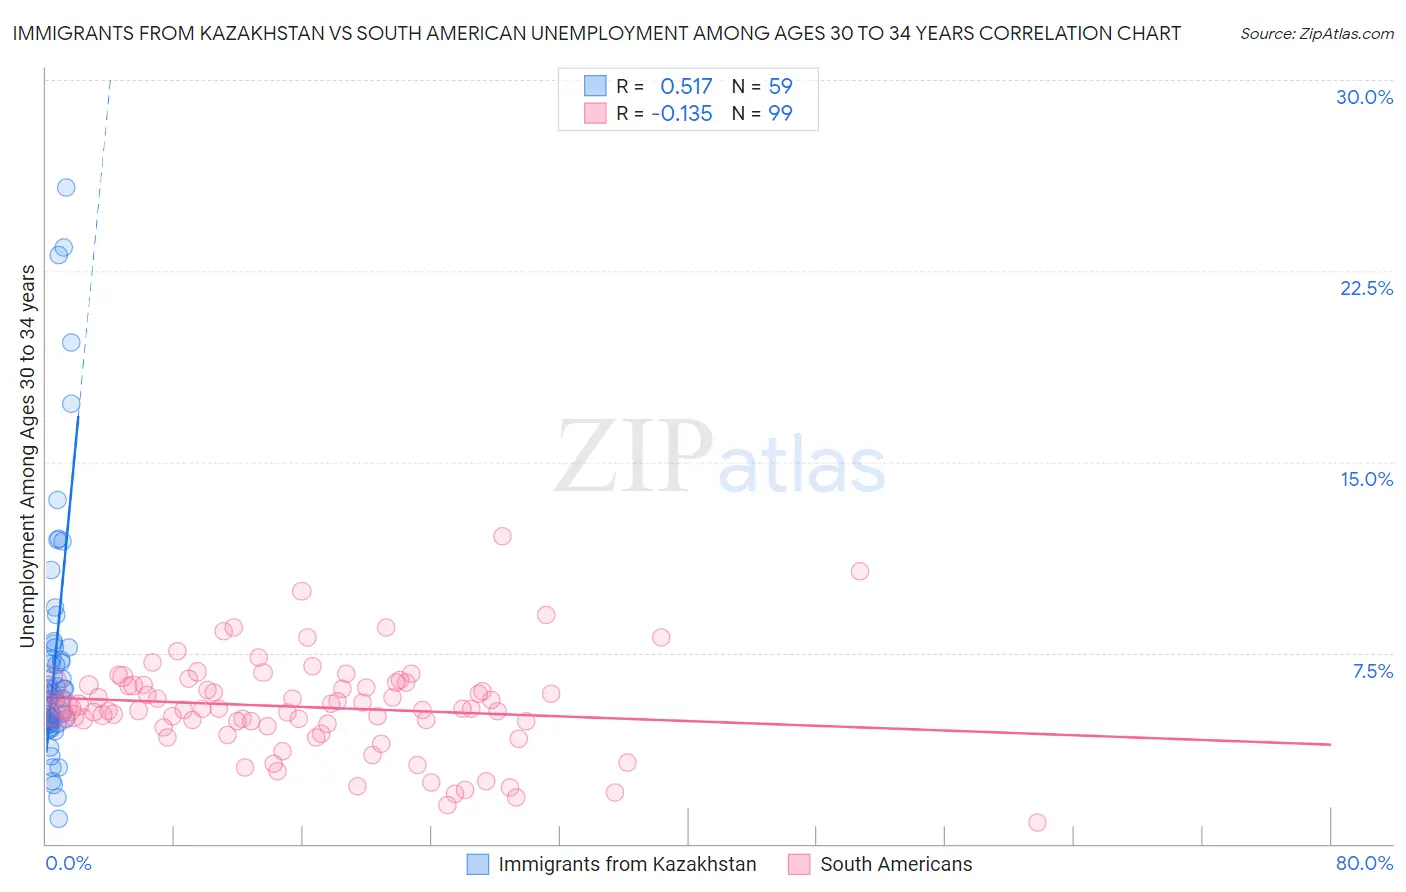 Immigrants from Kazakhstan vs South American Unemployment Among Ages 30 to 34 years